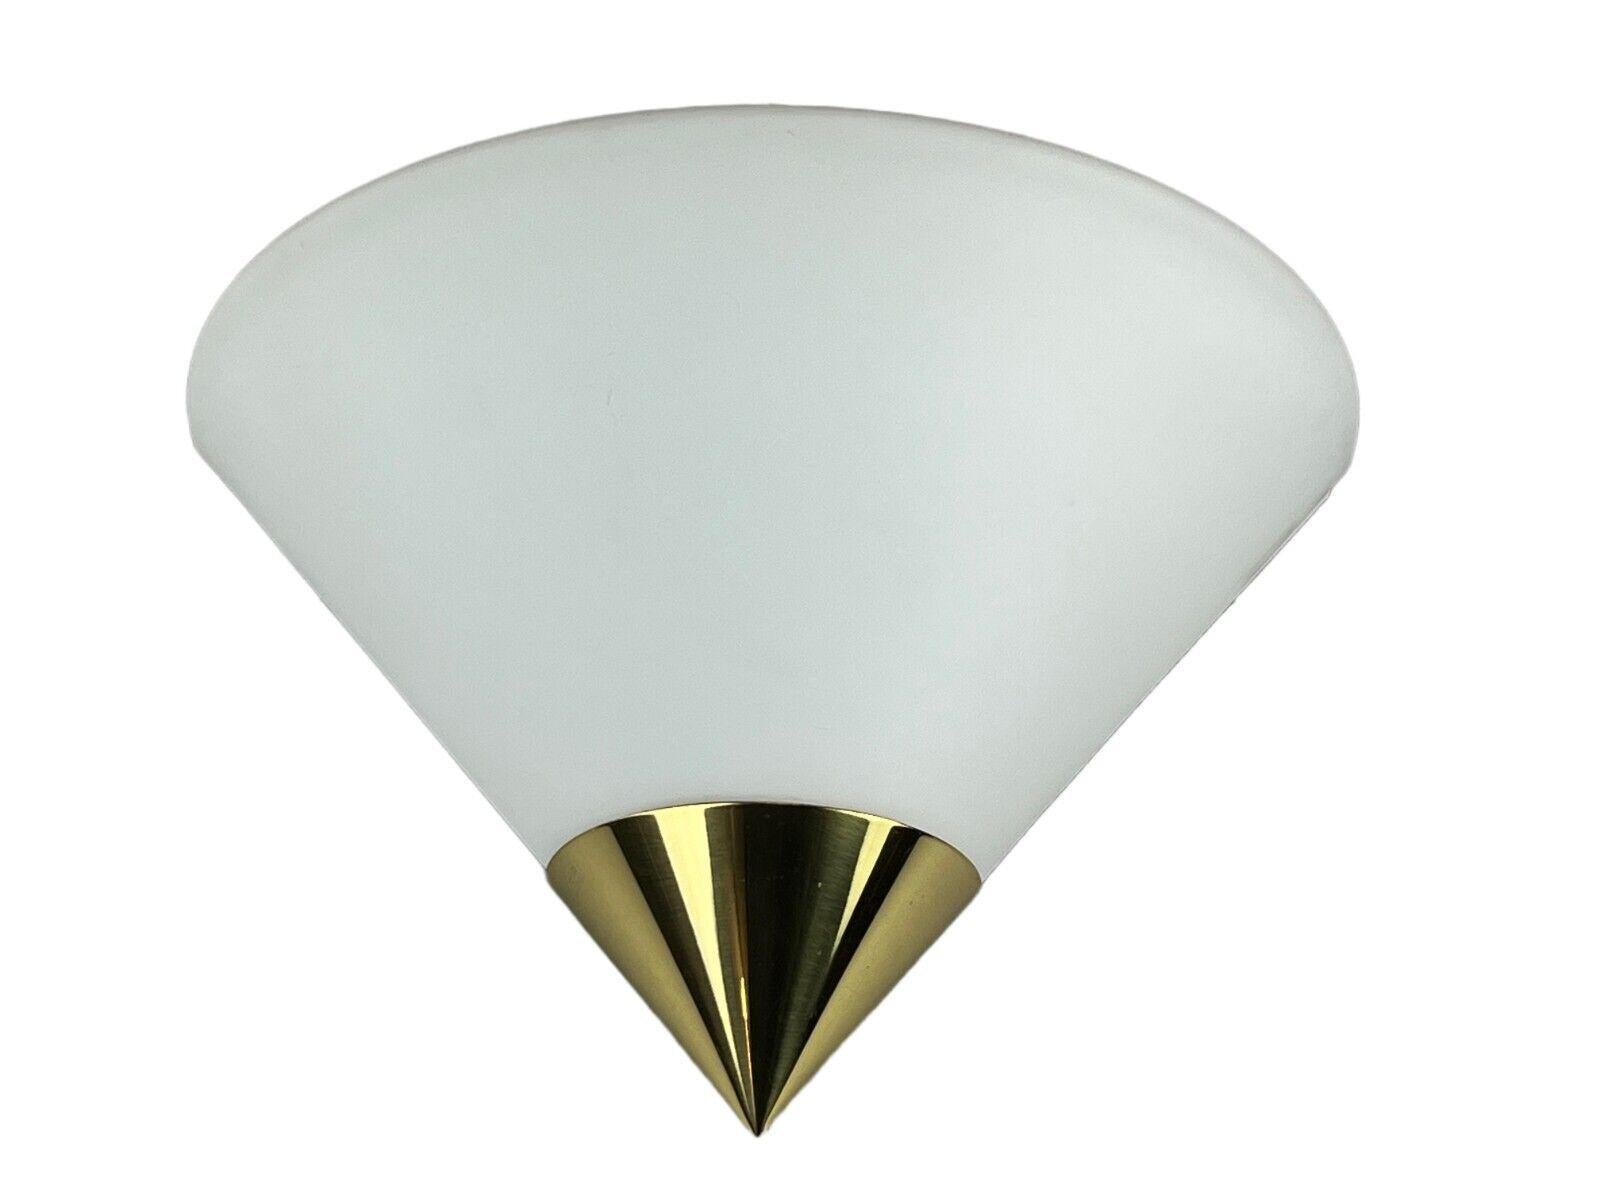 60s 70s lamp light wall lamp wall light Limburg Space Age Design

Object: wall lamp

Manufacturer: Glashütte Limburg

Condition: good

Age: around 1960-1970

Dimensions:

Height = 18cm
Width = 29cm
Depth = 15.5cm

Other notes:

E27 socket

The